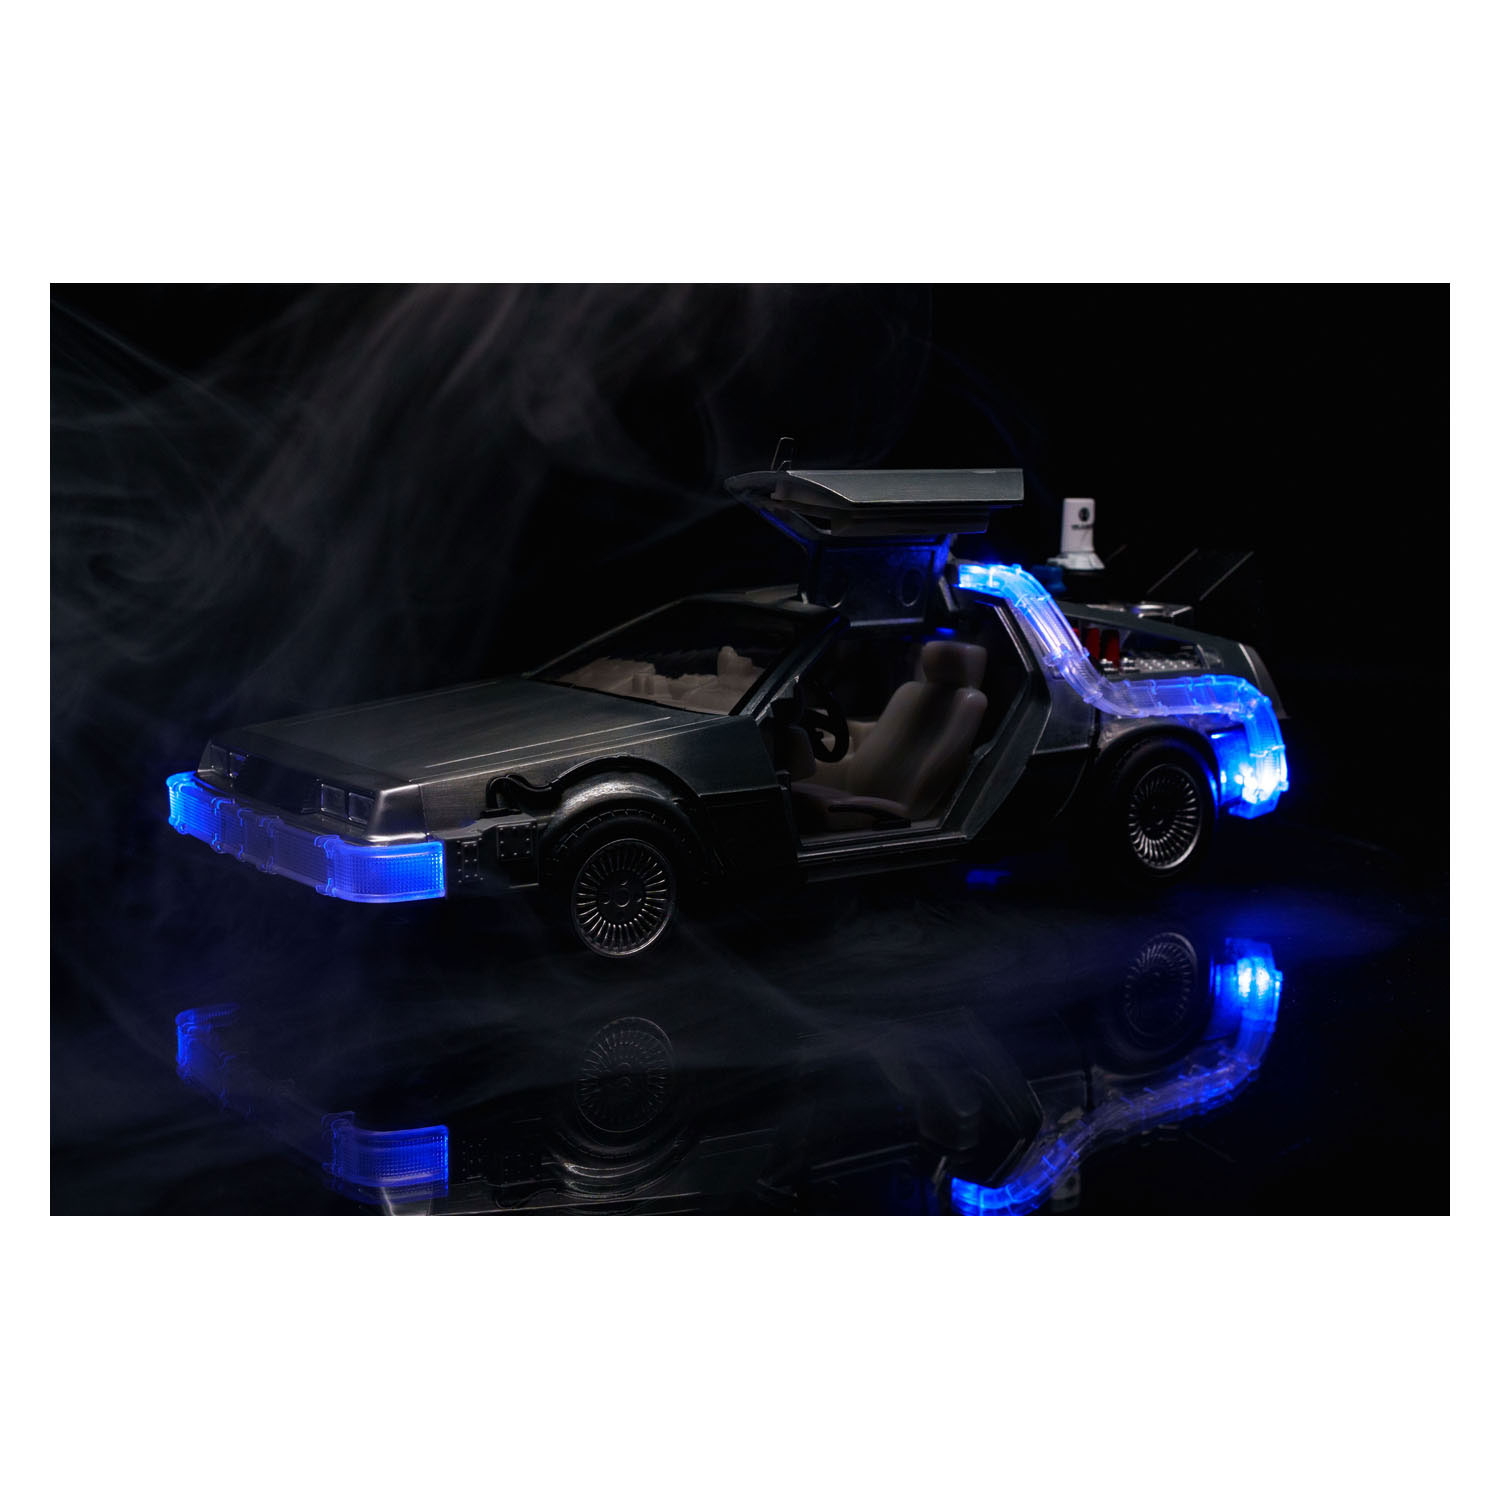 Jada Die-Cast Time Machine Back to the Future 2 1:24